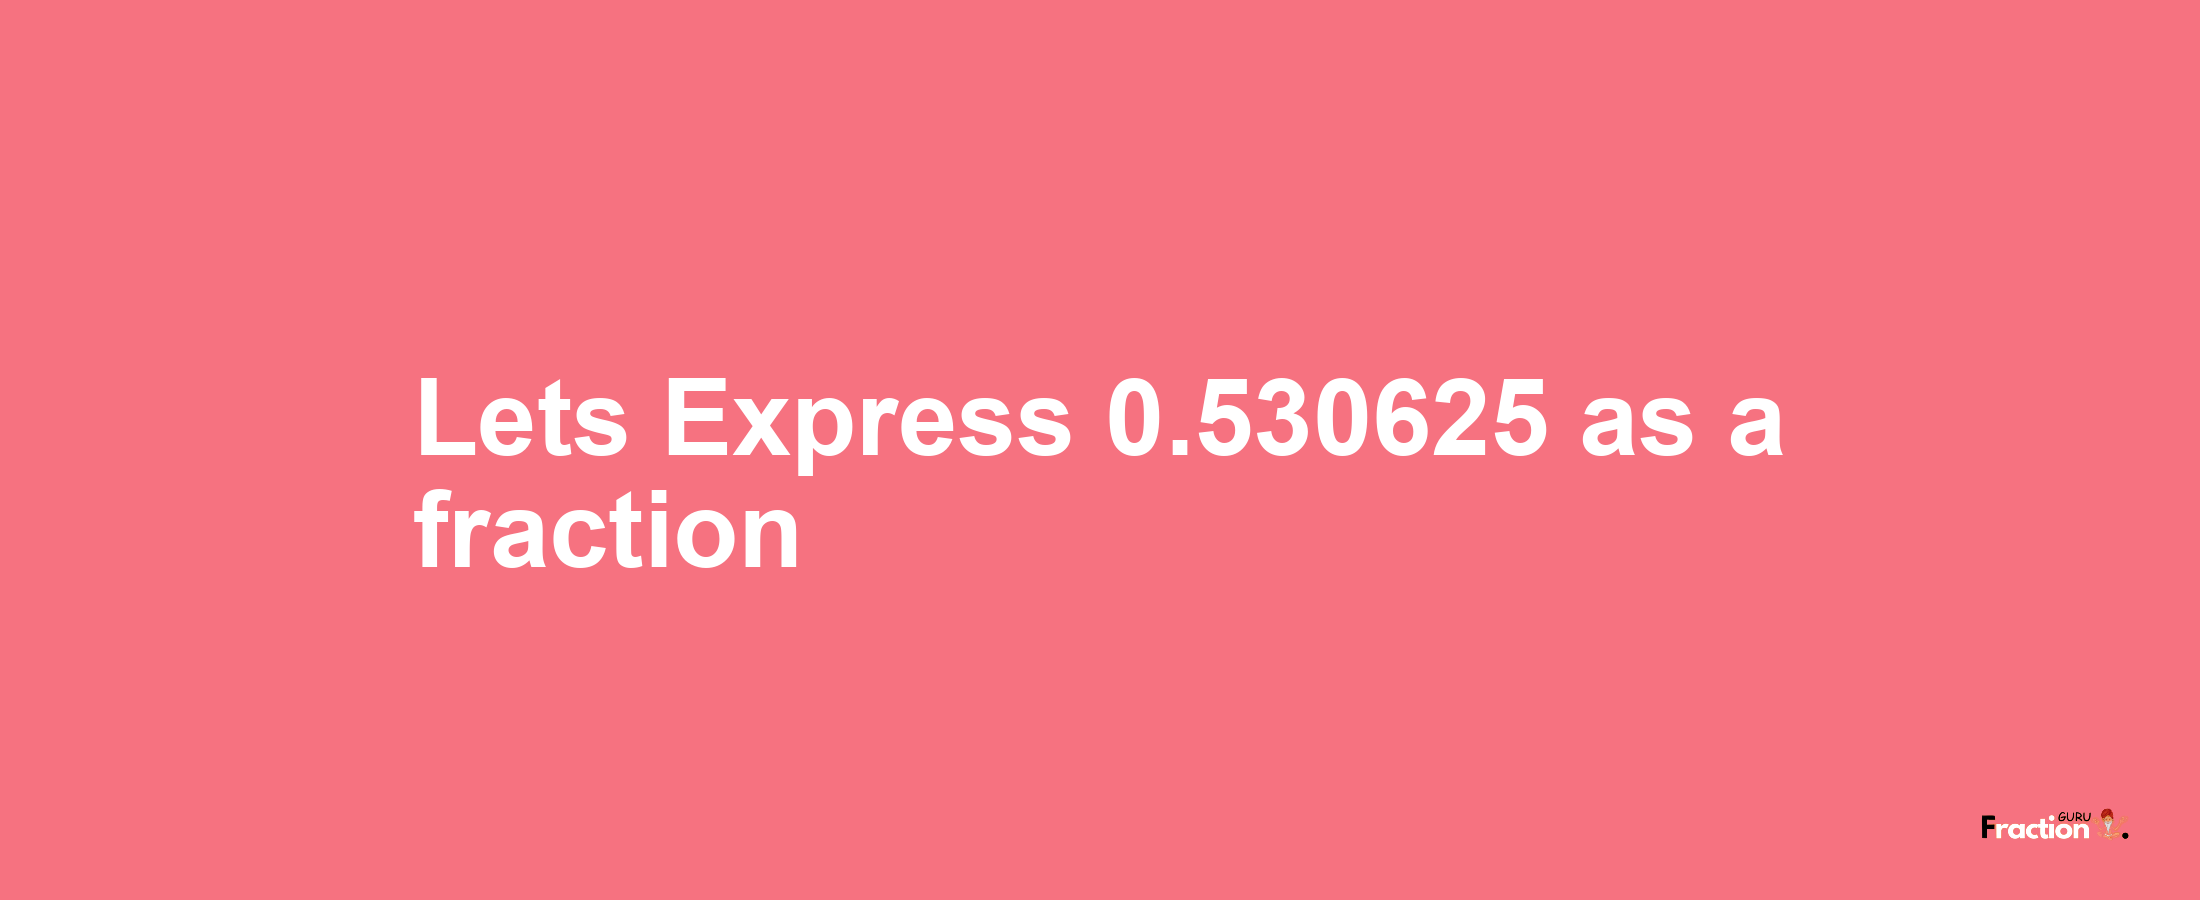 Lets Express 0.530625 as afraction